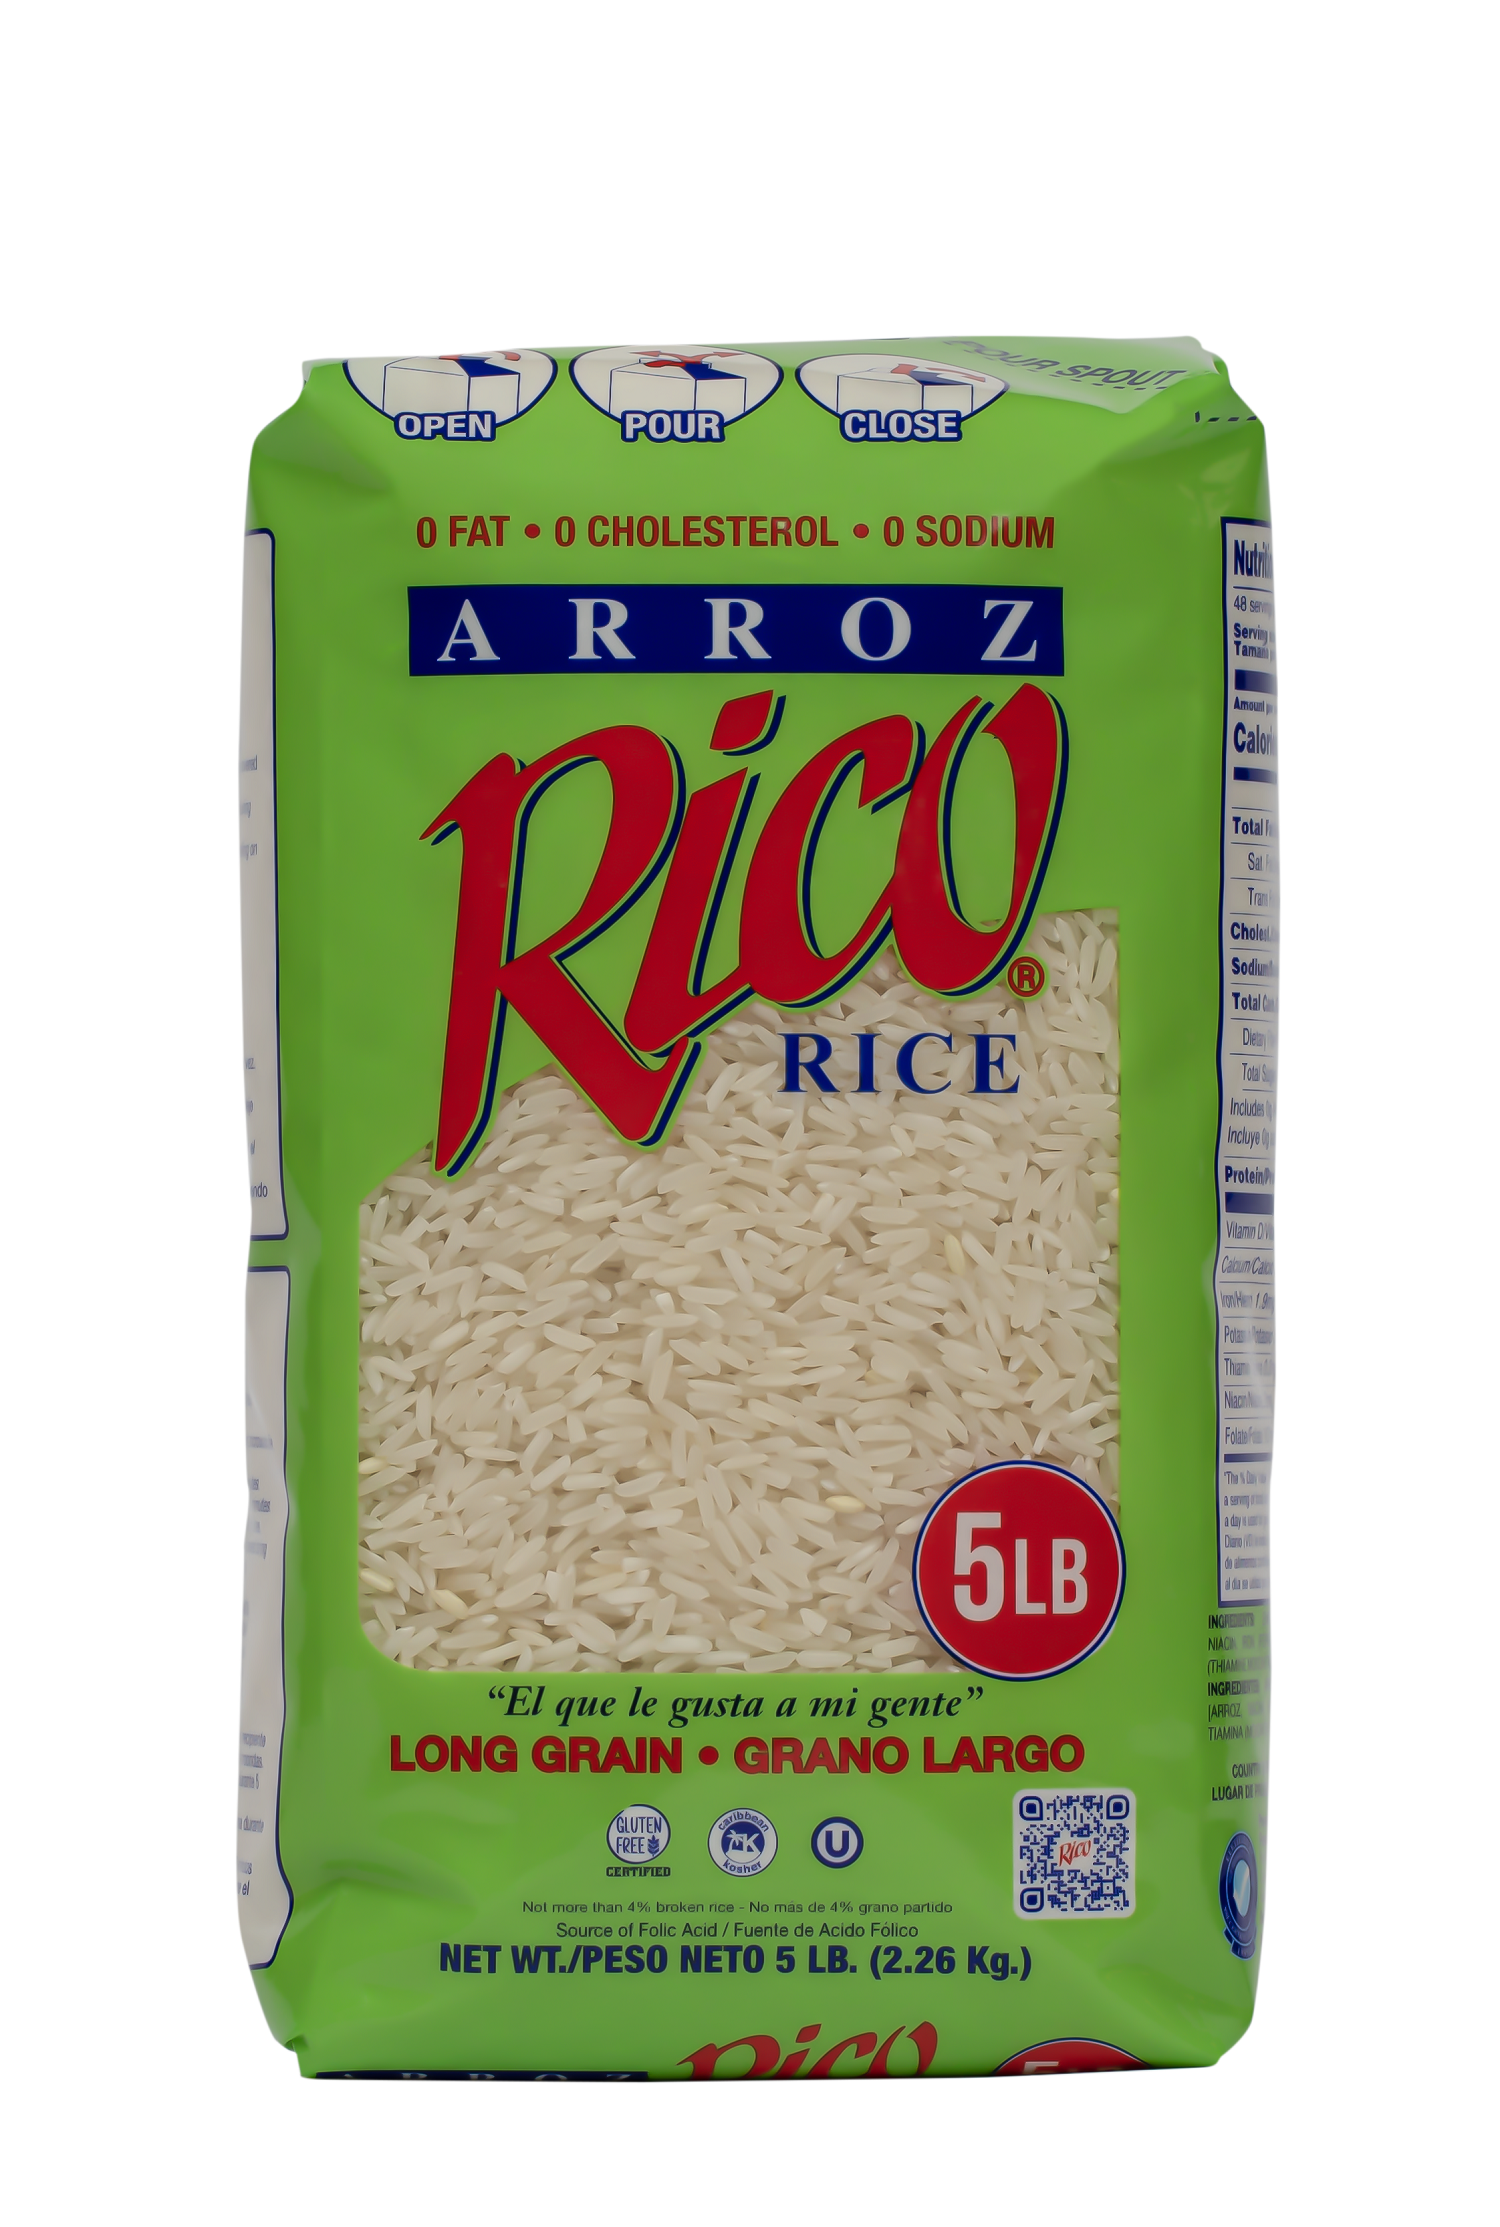 Rico Long Grain Rice 5 lb Gluten Free Made in Puerto Rico - image 1 of 8